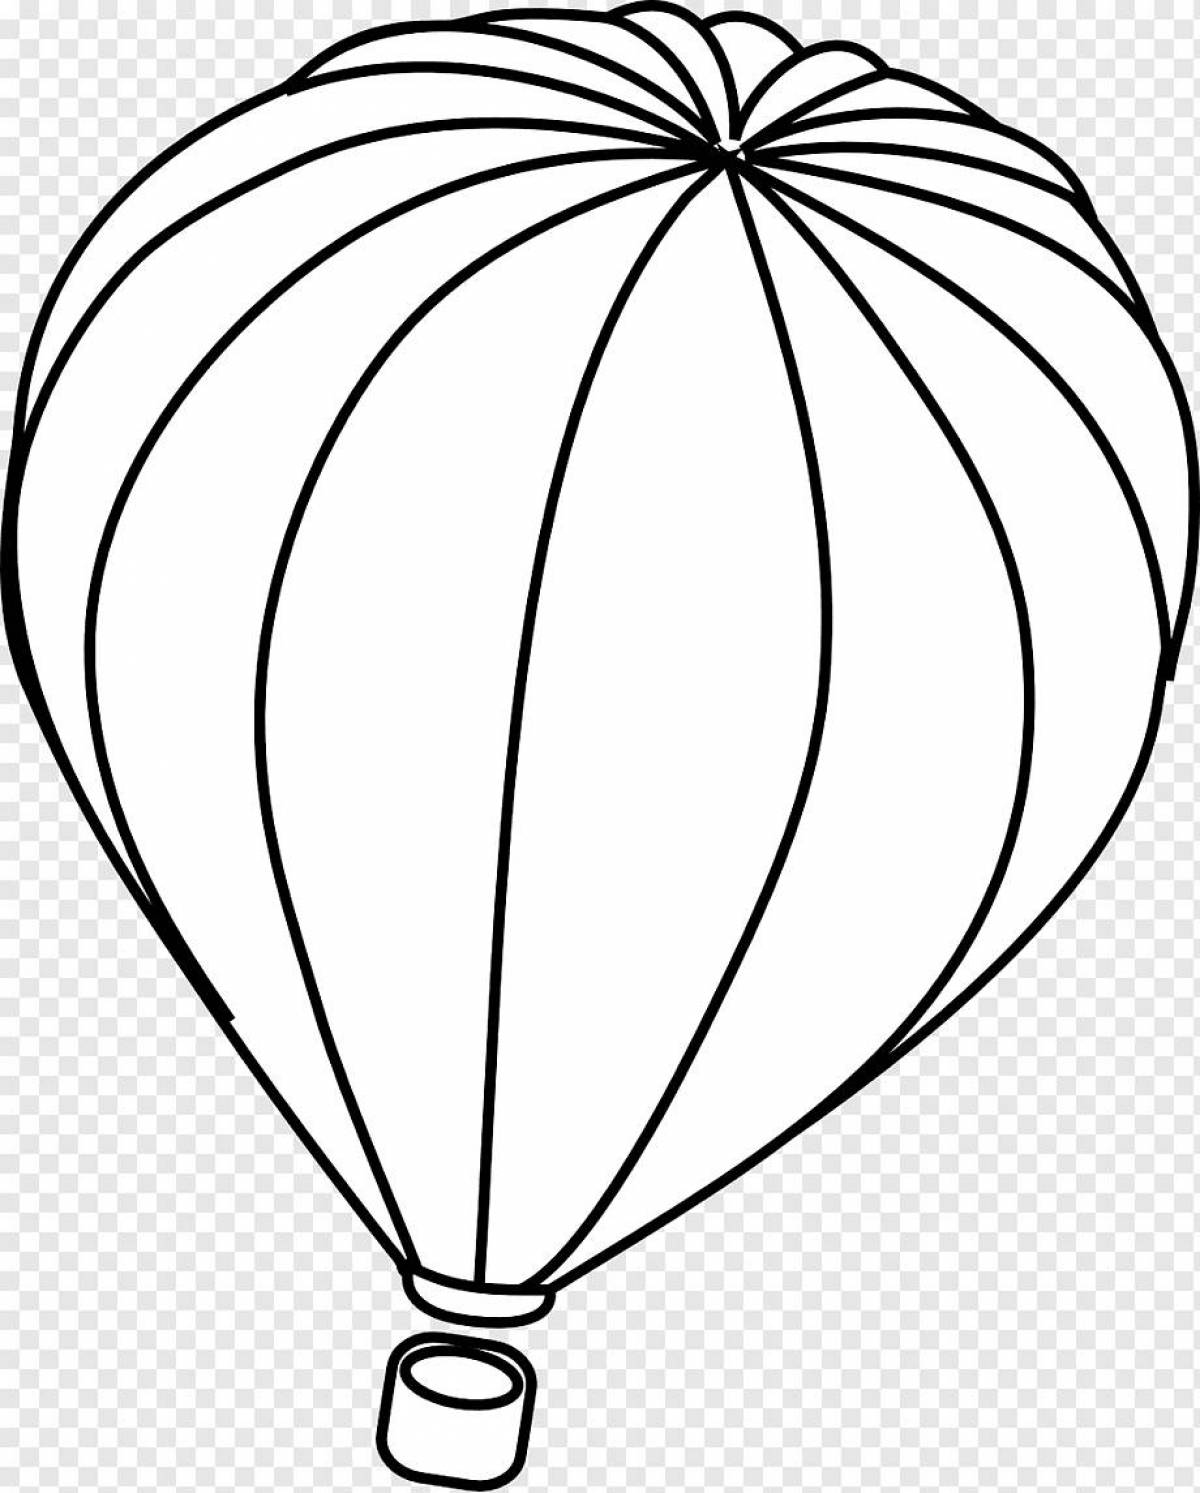 Glossy ball coloring page